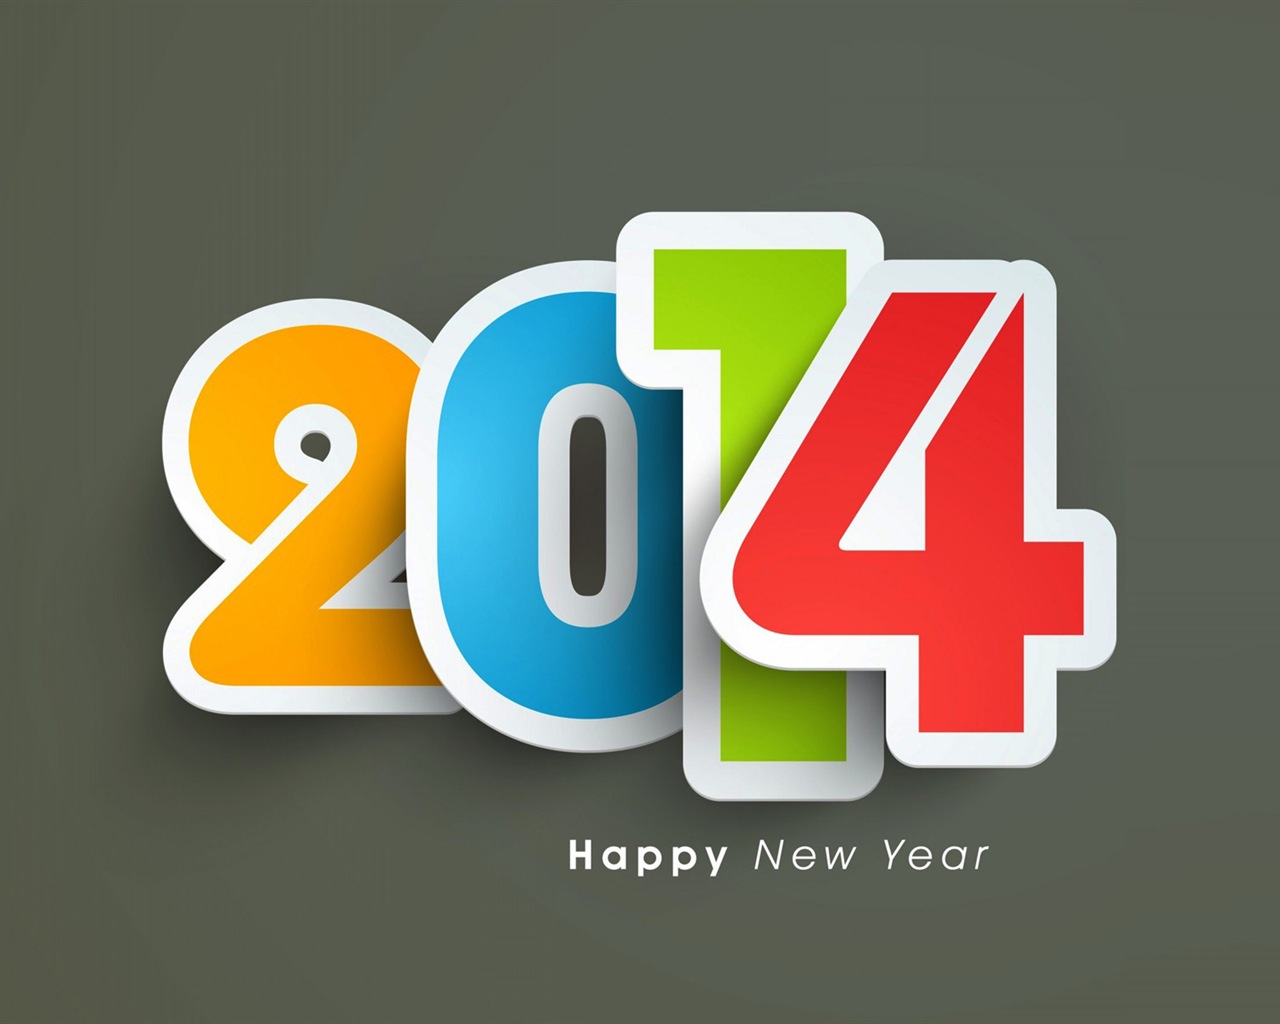 2014 New Year Theme HD Wallpapers (2) #9 - 1280x1024